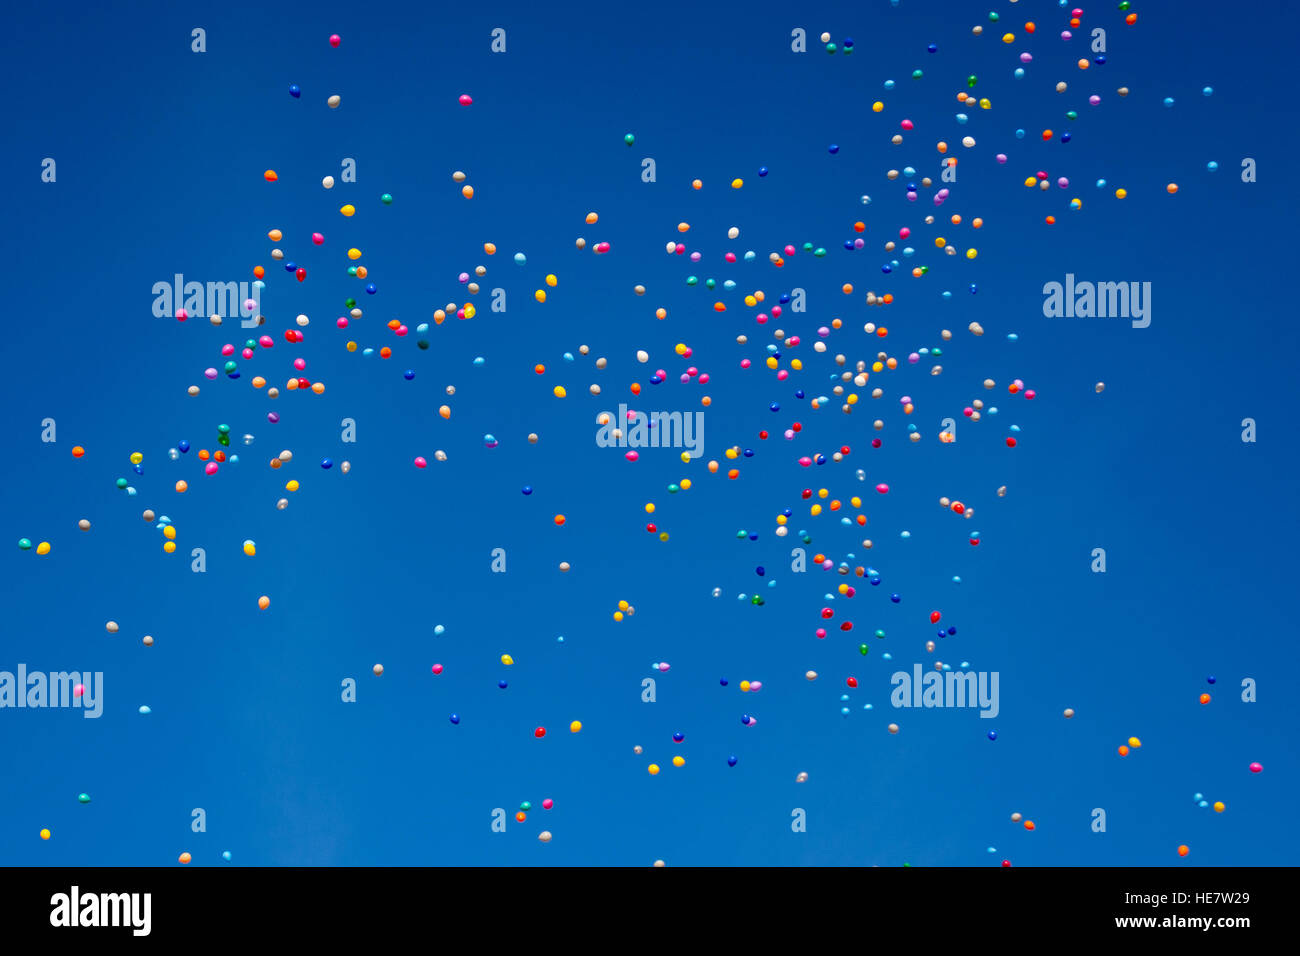 Hundreds of colorful balloons are flying through the blue cloudless sky Stock Photo